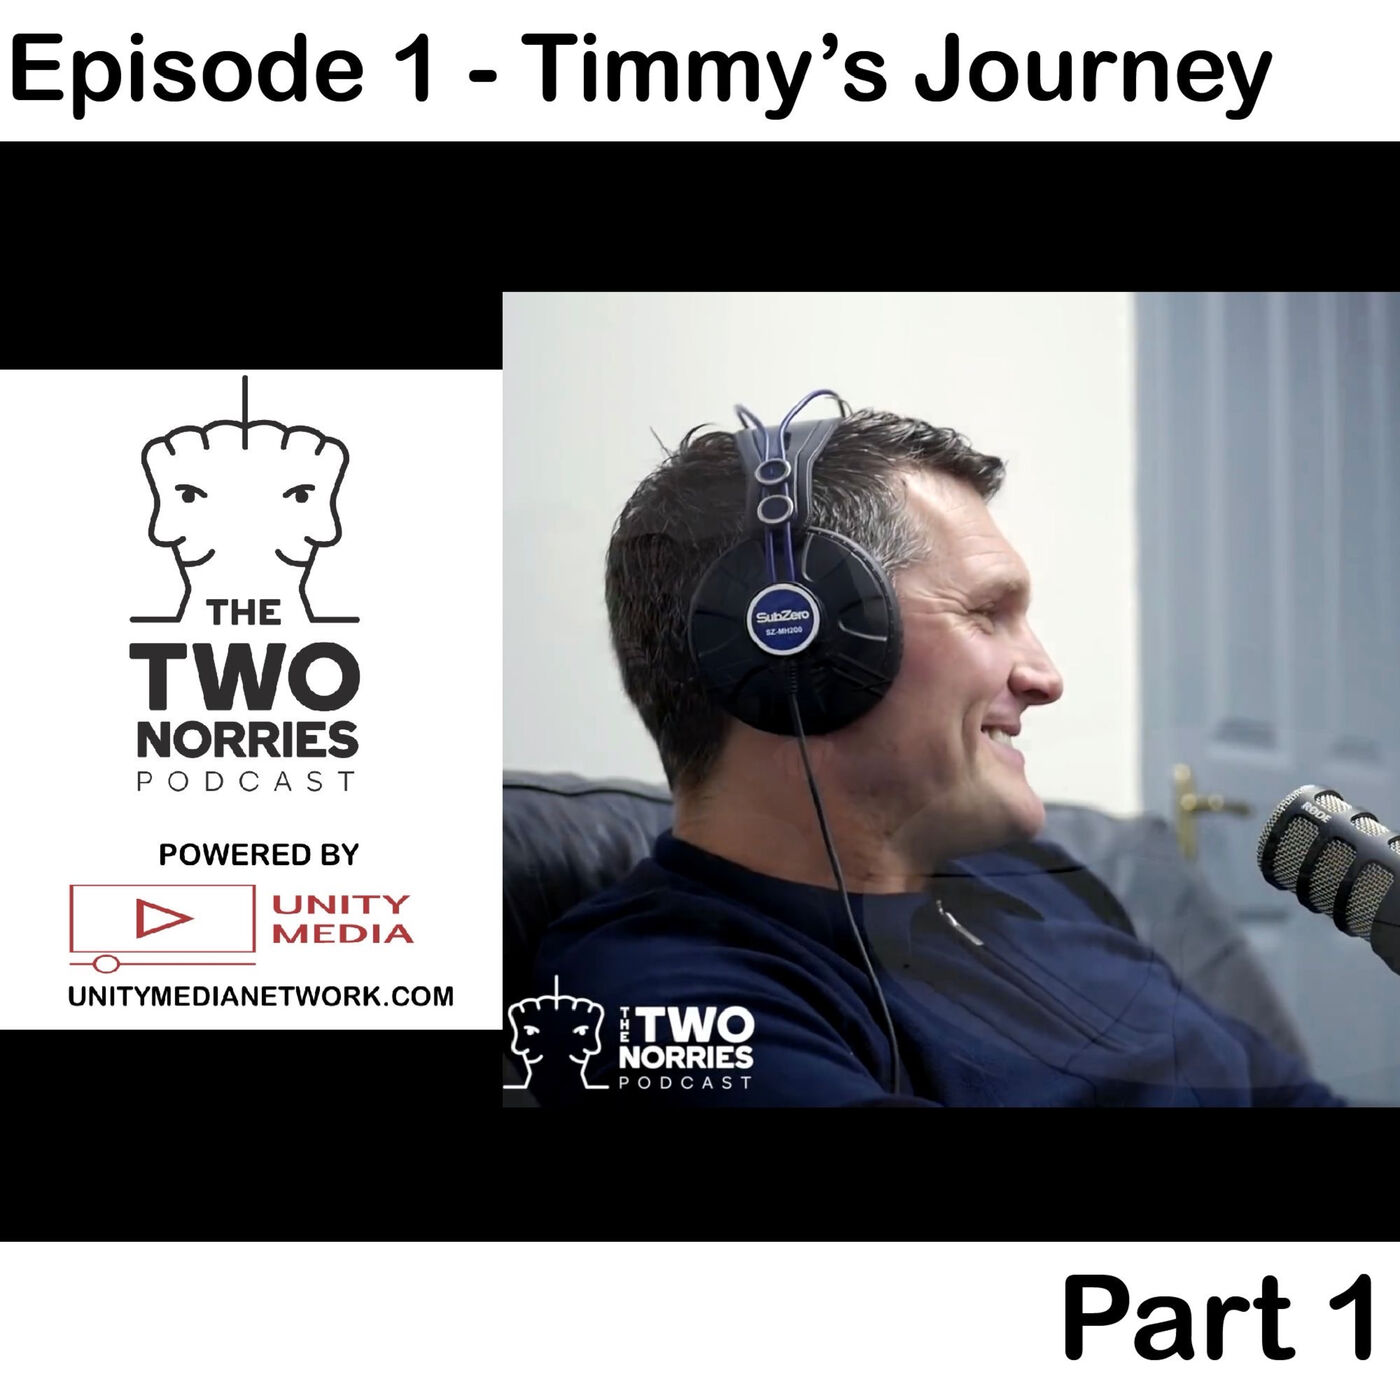 Podcast #1. Timmy's Journey. Timmy gives his story of childhood trauma, drugs, violence and crime.